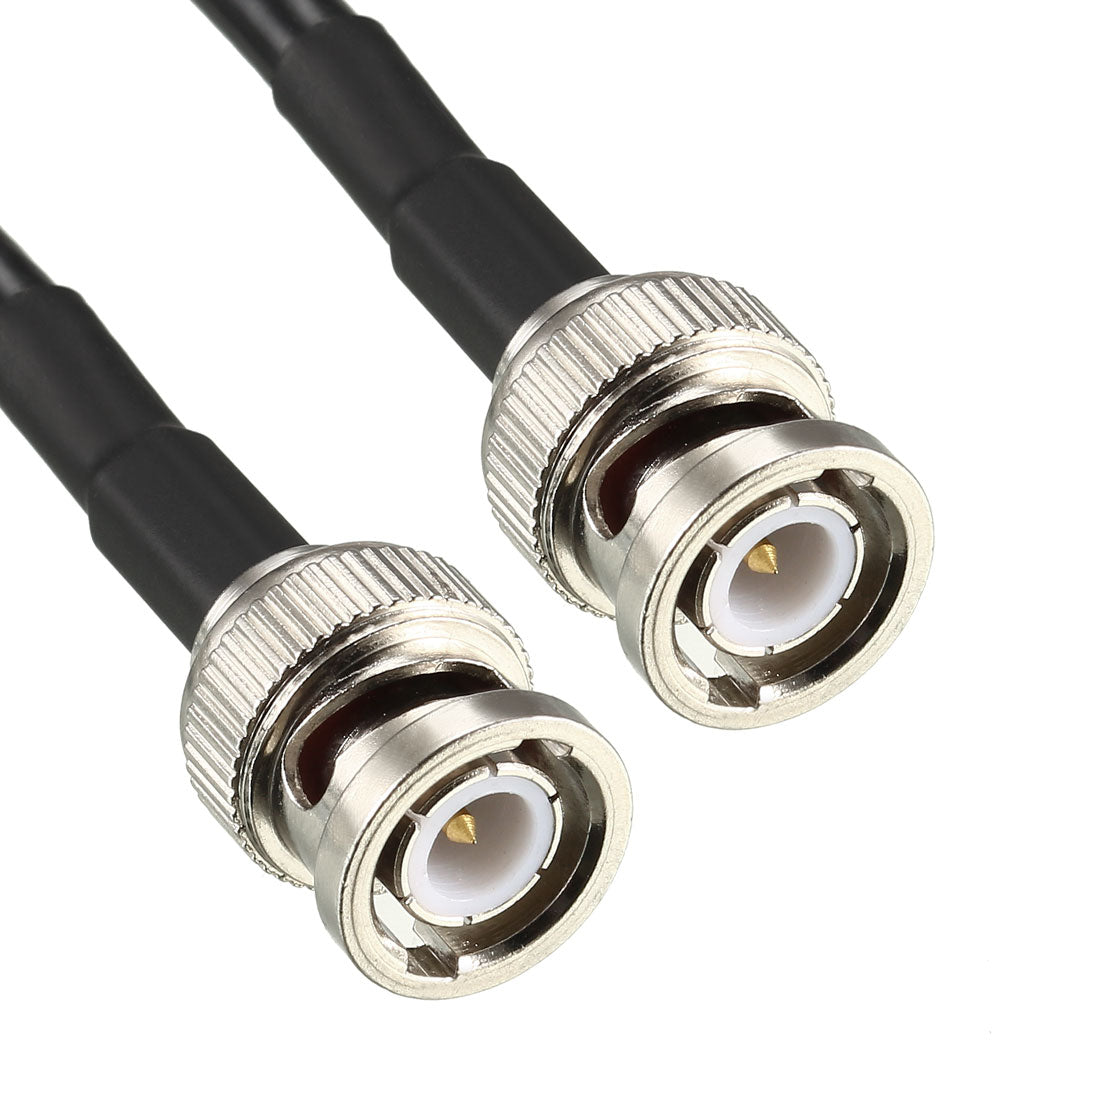 uxcell Uxcell RG58 Coaxial Cable with BNC Male to BNC Male Connectors 50 Ohm